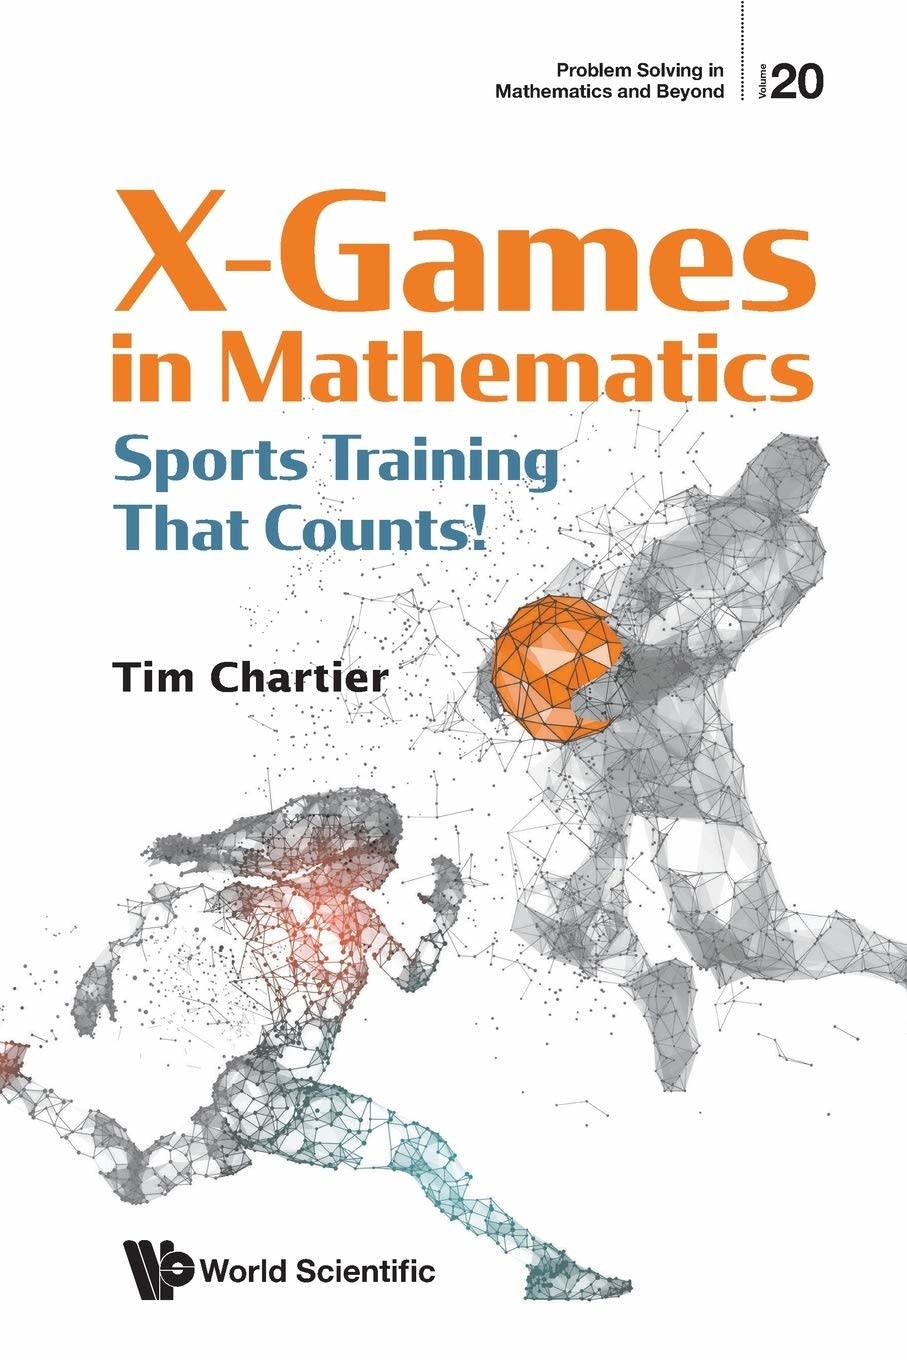 X Games In Mathematics: Sports Training That Counts! by Tim Chartier